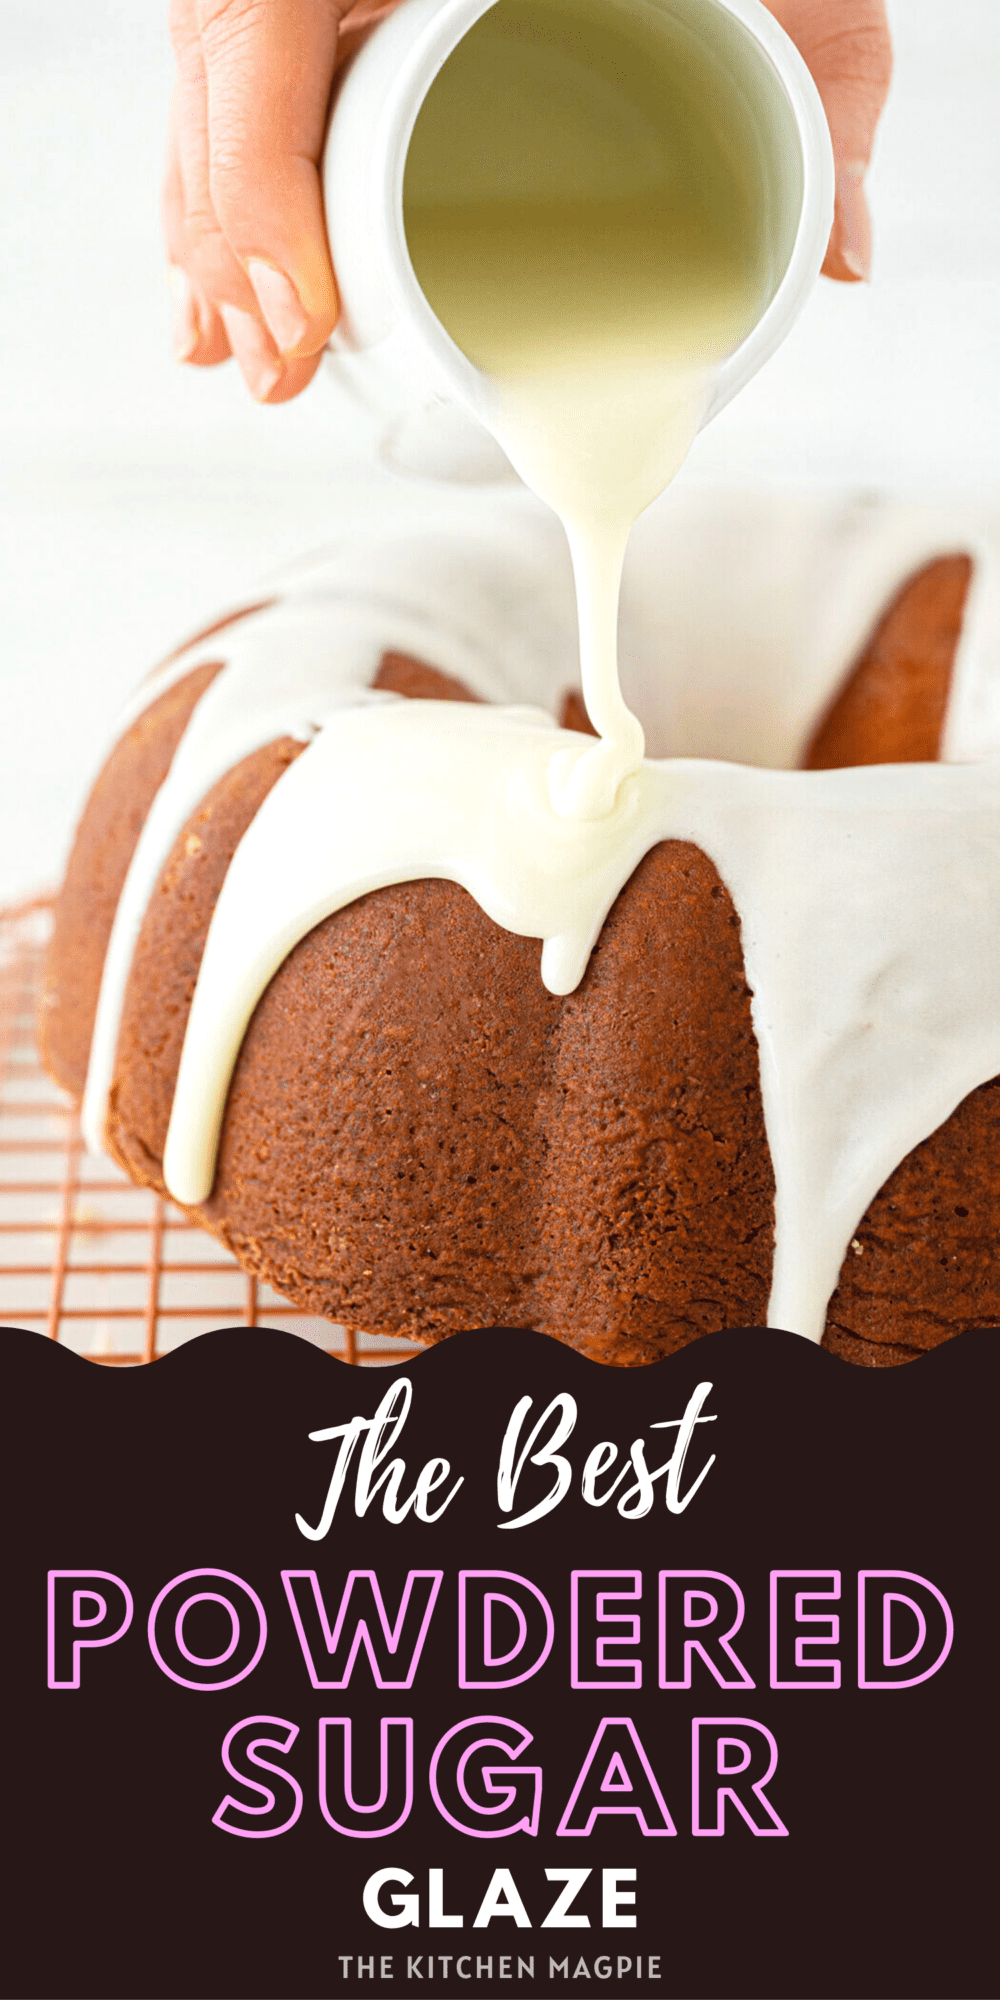 The best powdered sugar glaze that drizzles perfectly for a crackly icing that is excellent for cakes, muffins, cinnamon buns and more!